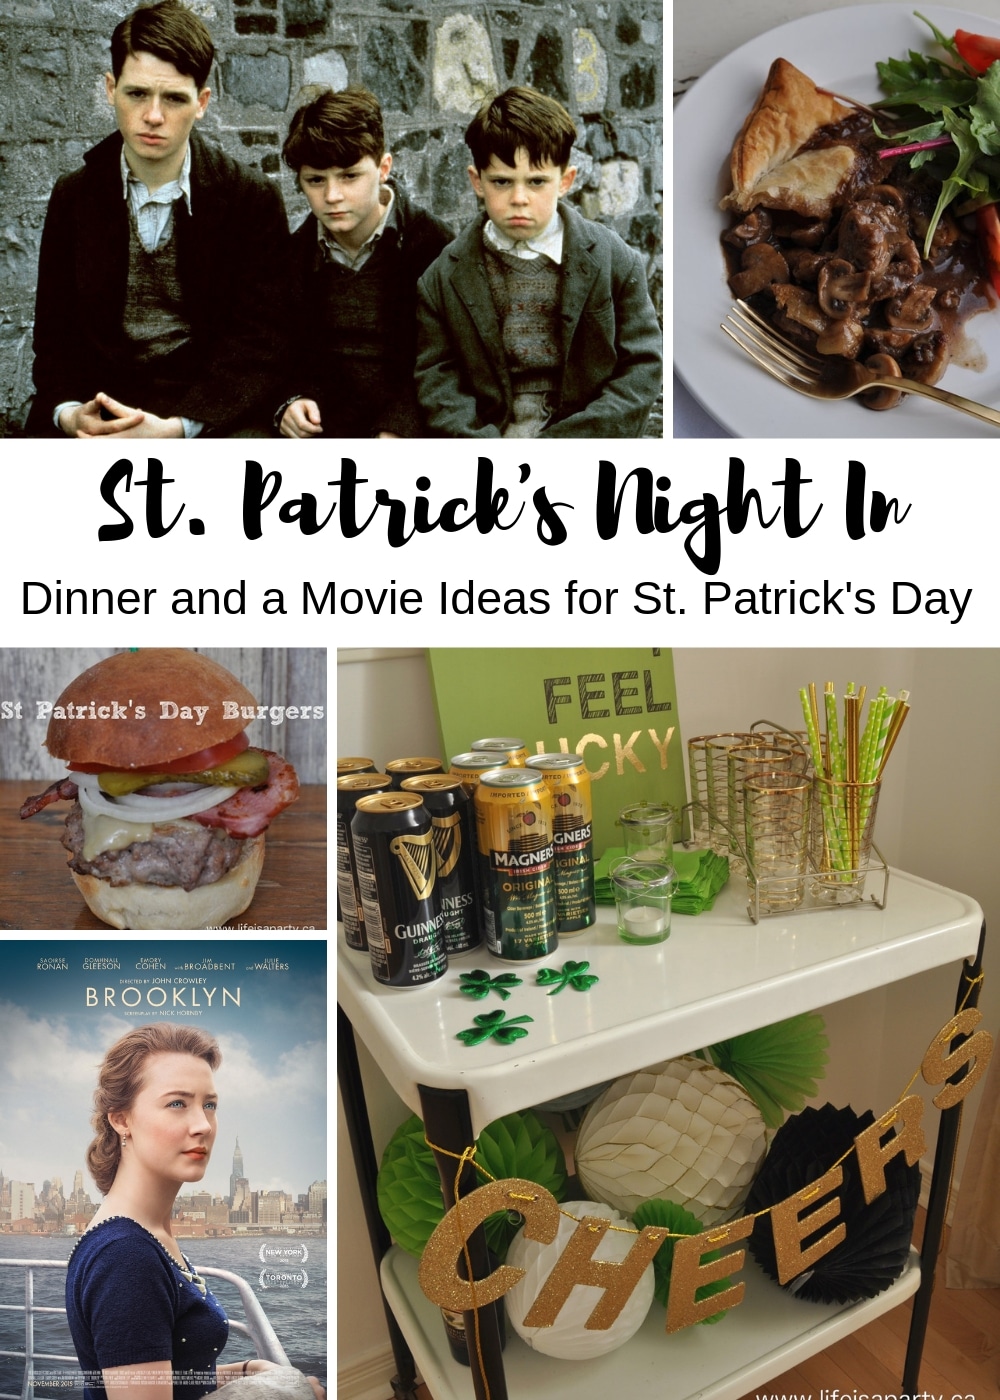 St. Patrick’s Night In -Dinner and Movie Ideas for St. Patrick’s Day